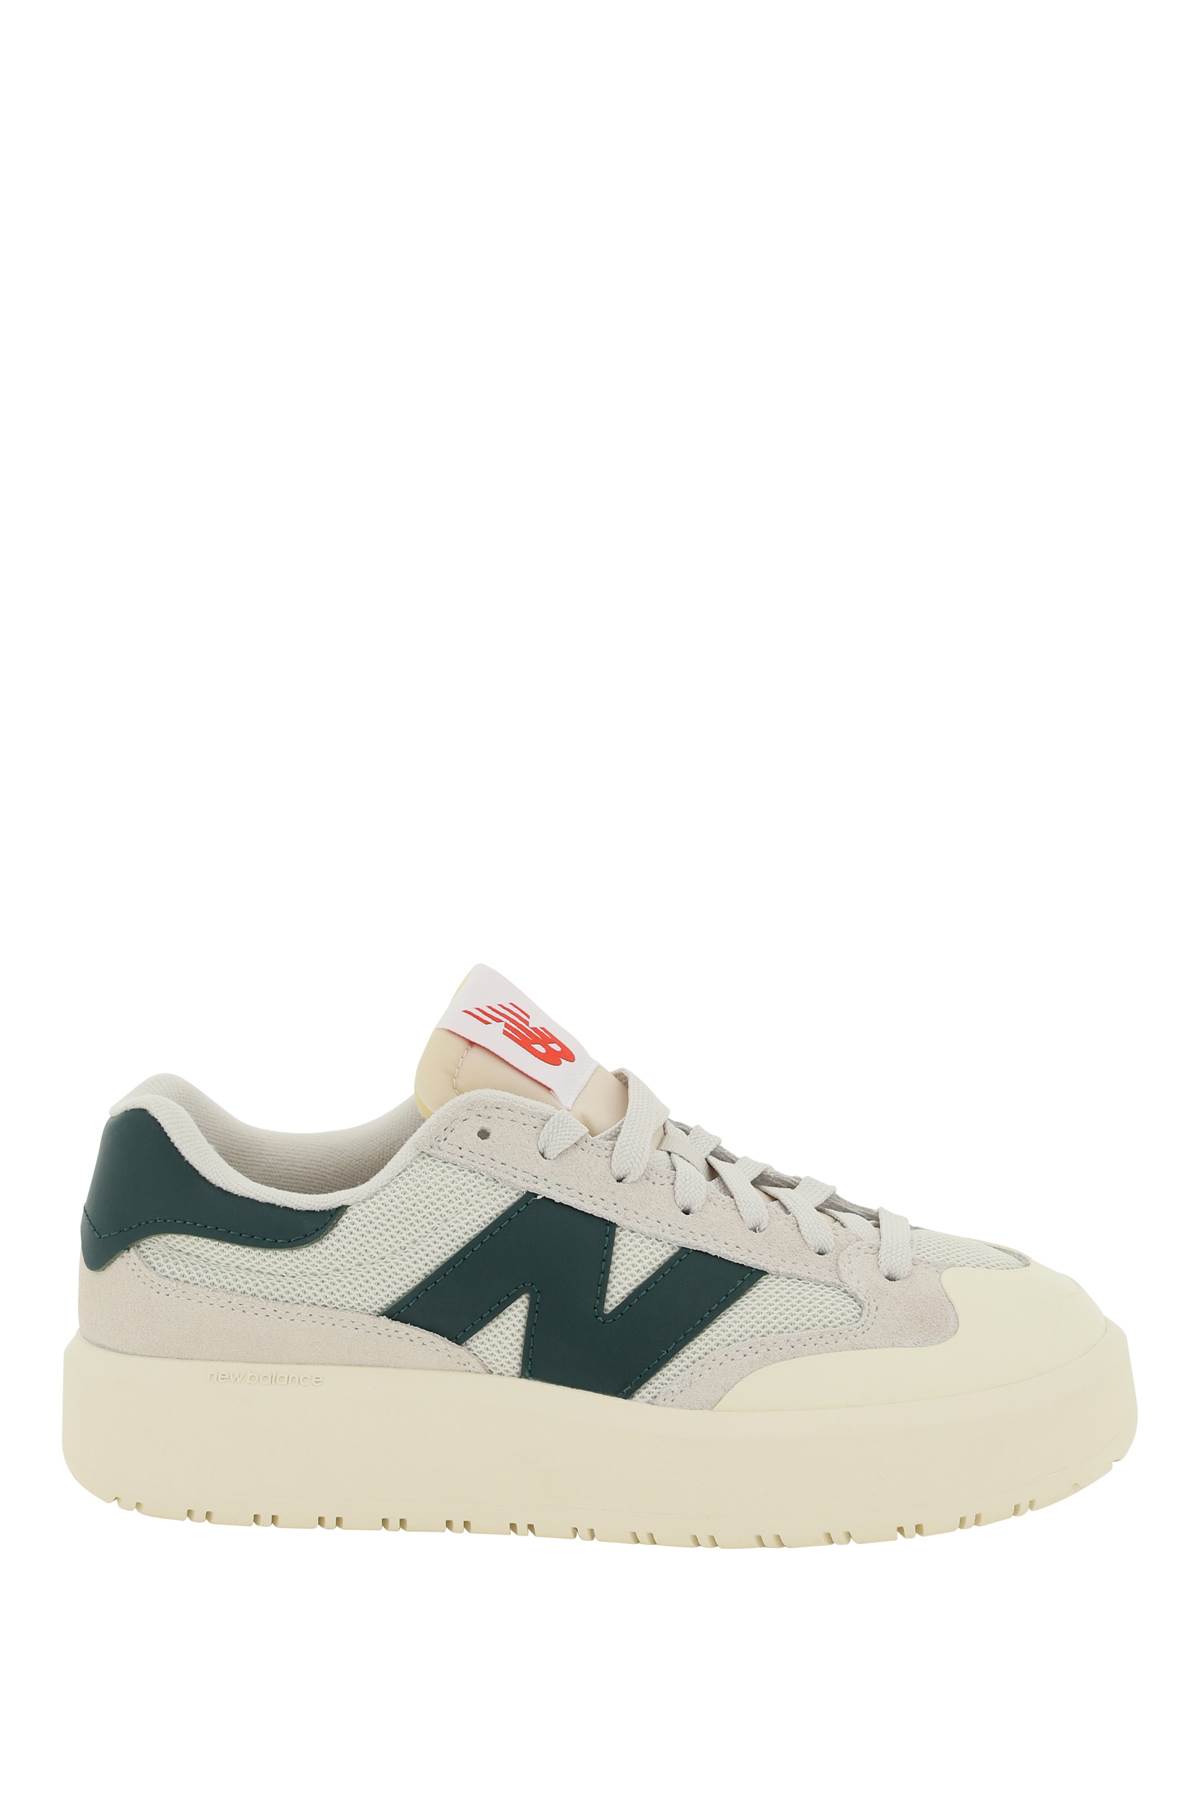 New Balance Ct302 Sneakers